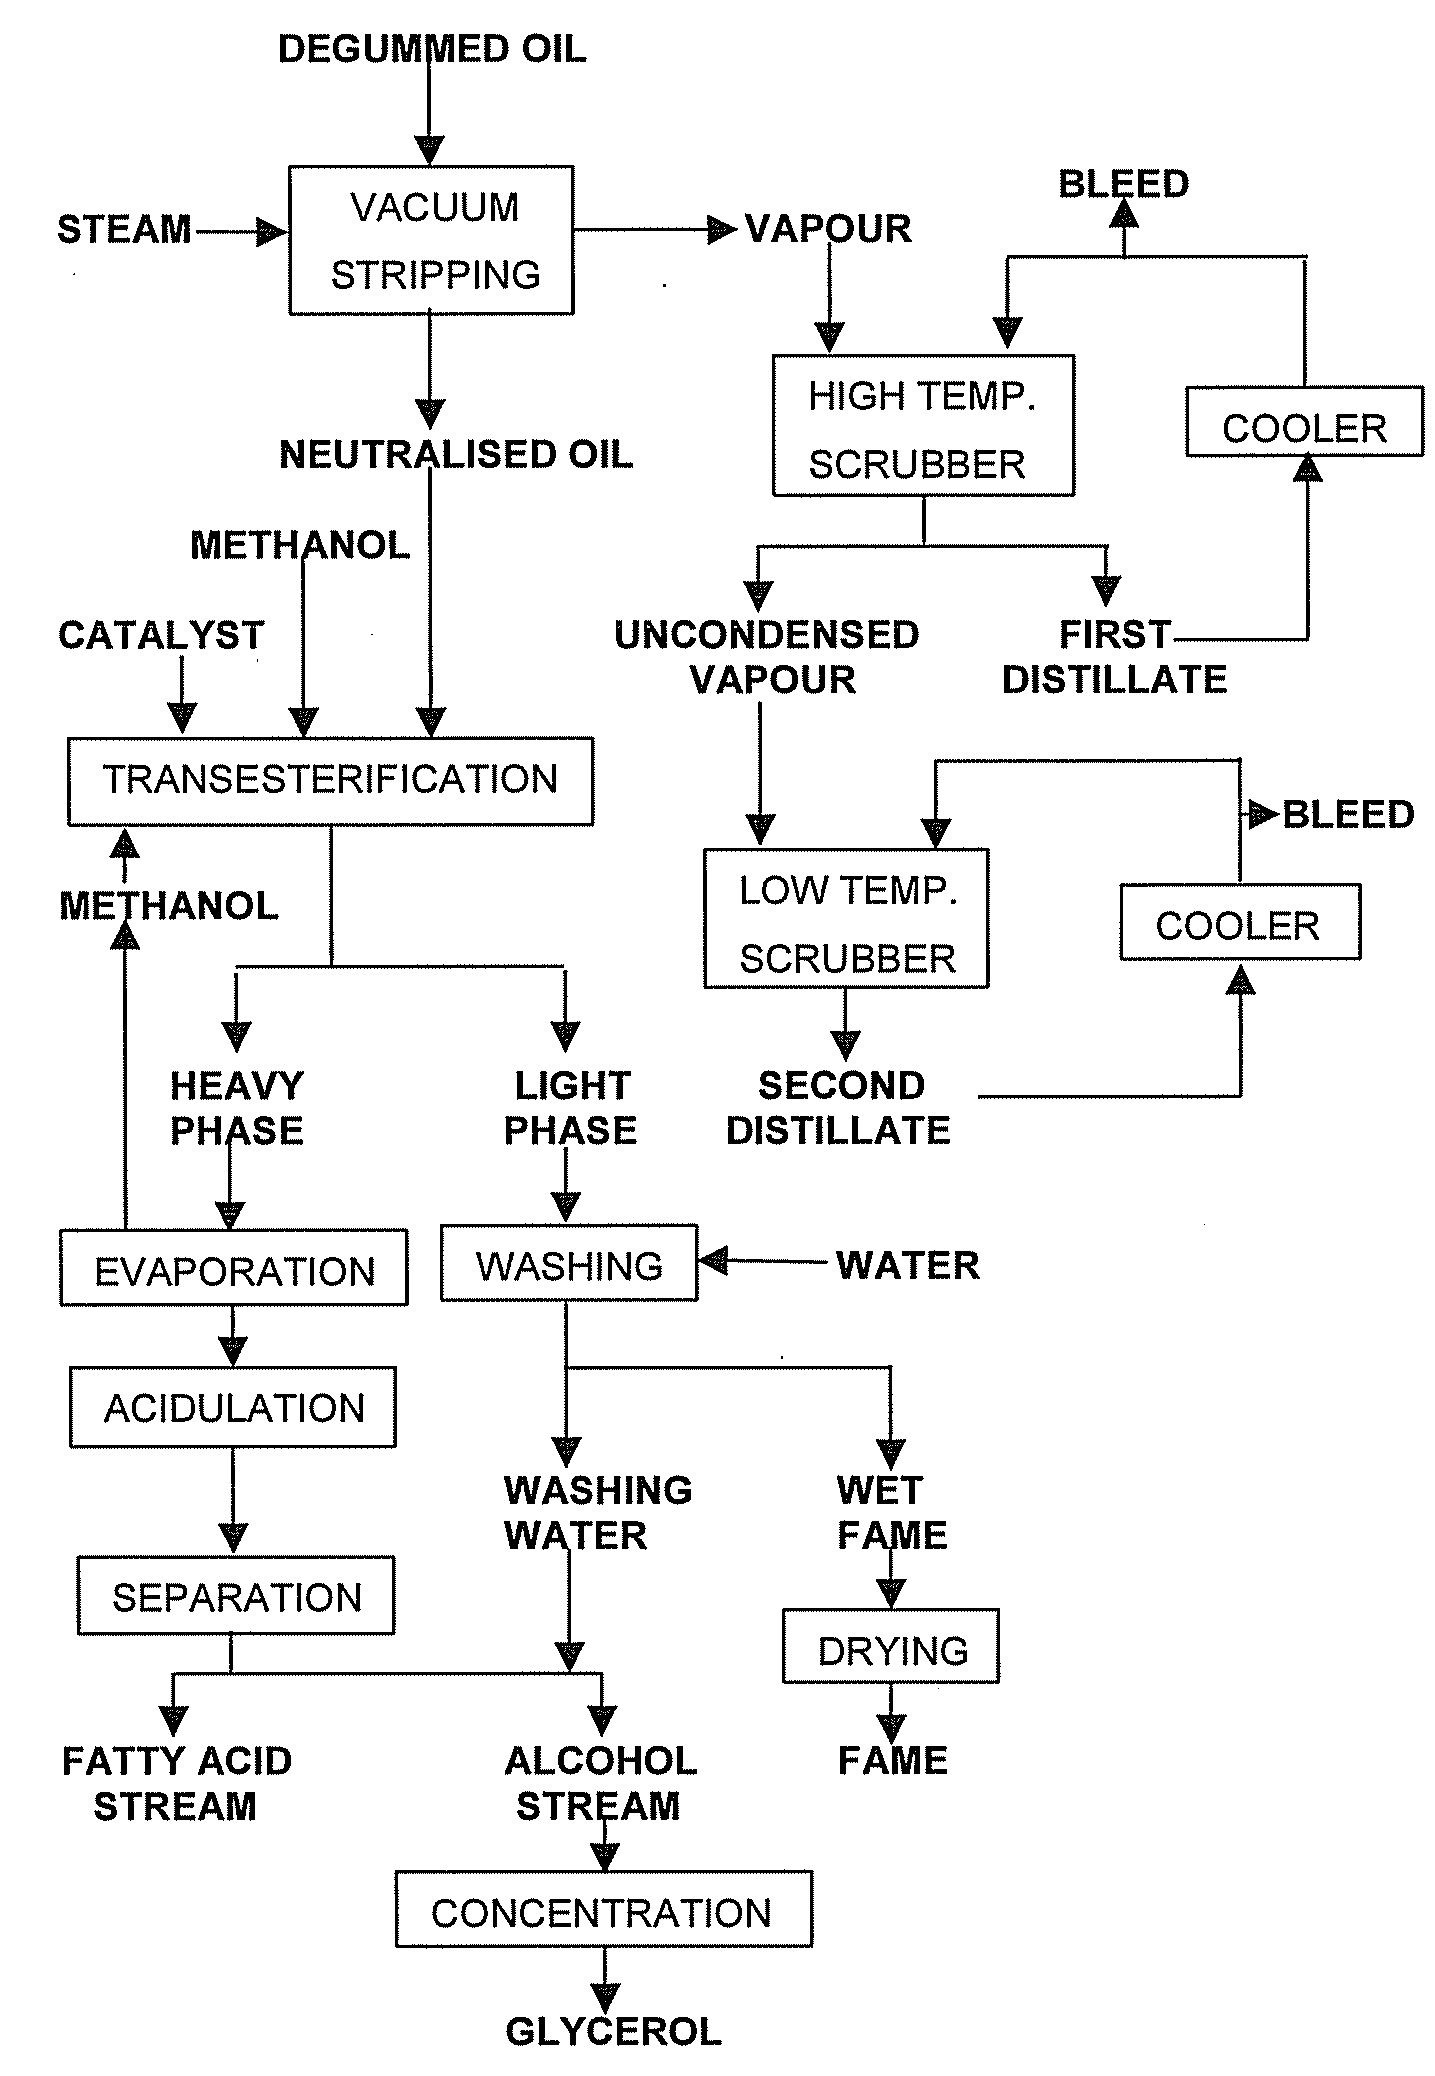 Production of esters of fatty acids and lower alcohols